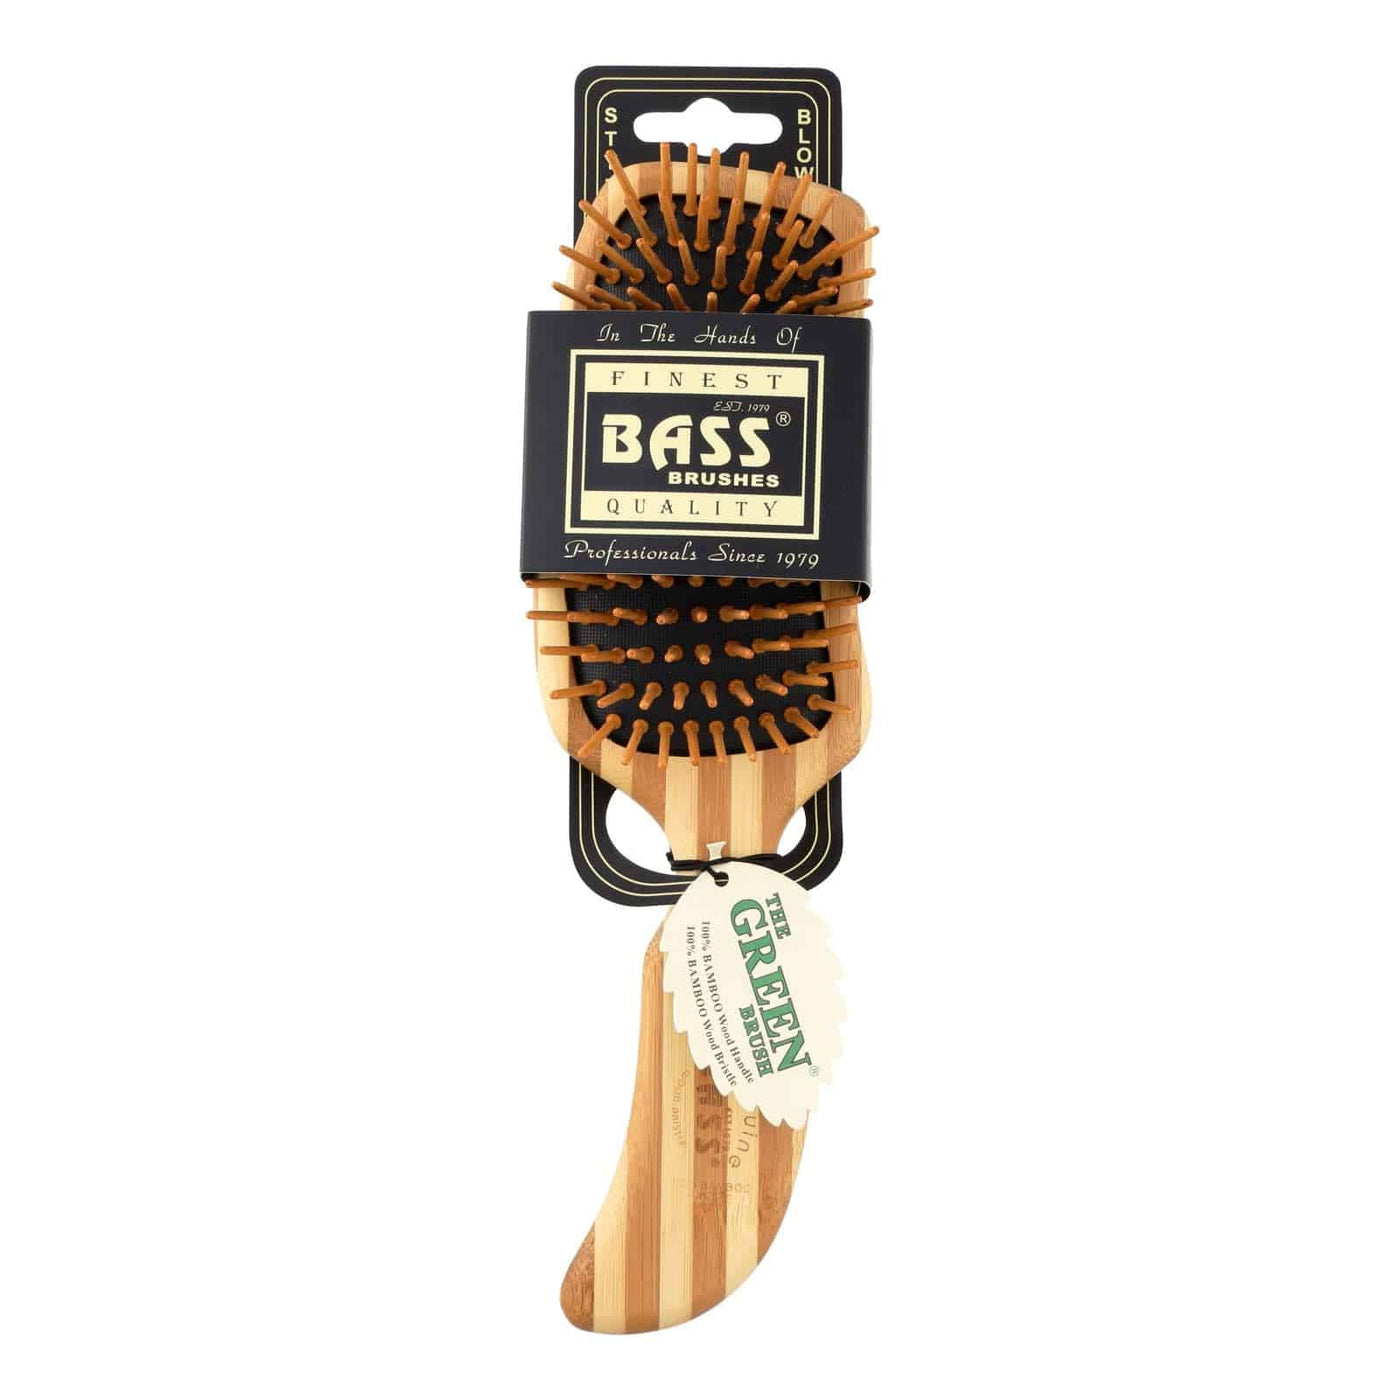 Bass Brushes The Green Brush  - 1 Each - Ct | OnlyNaturals.us